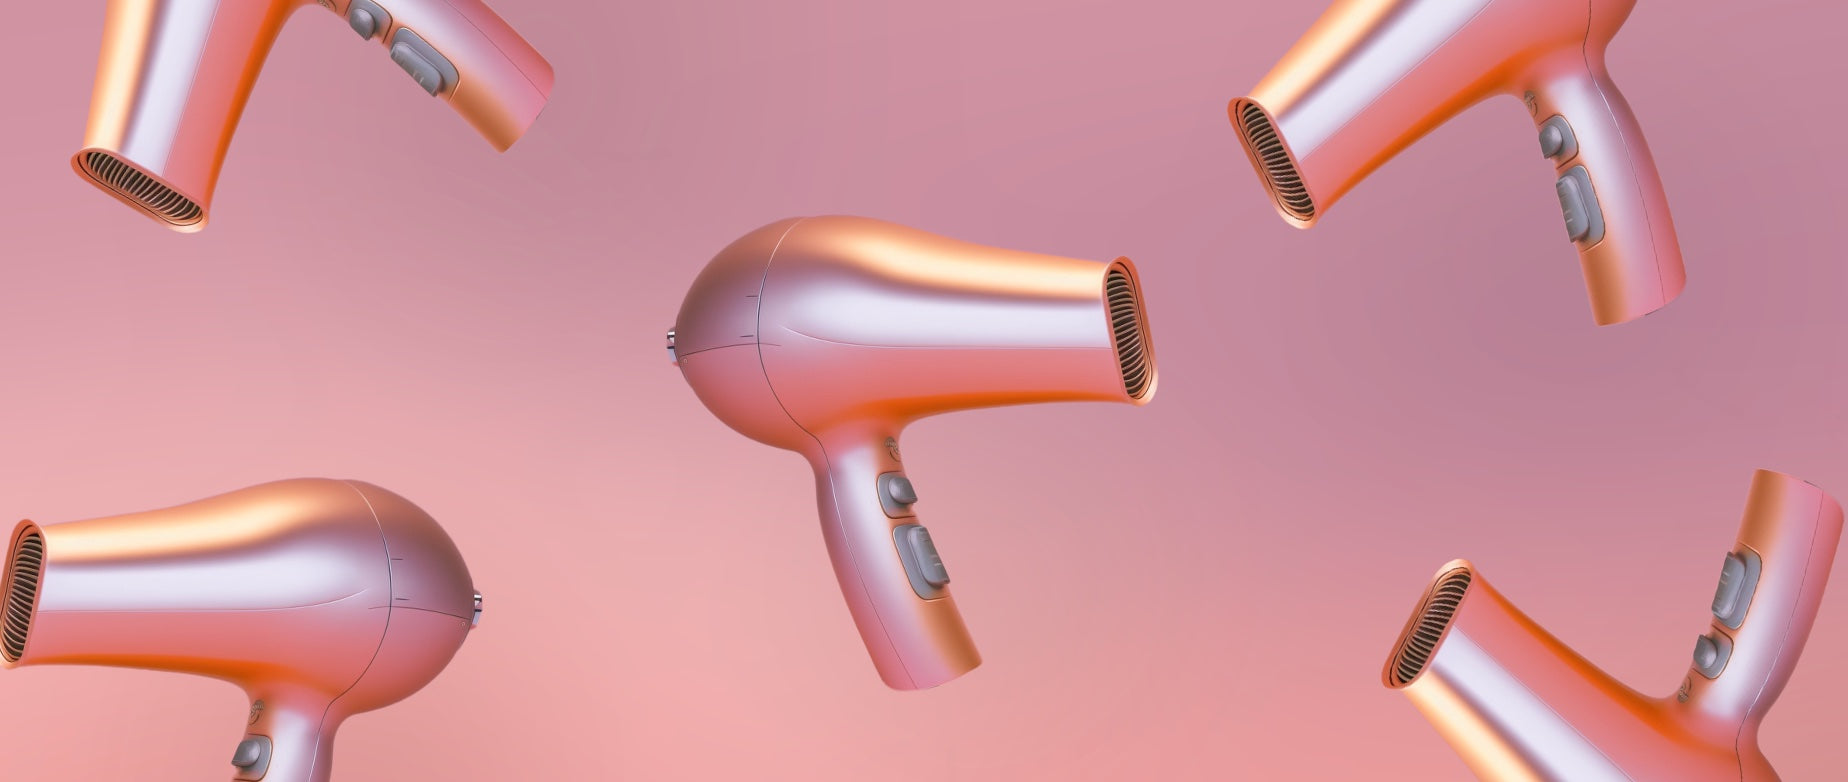 multiple hairdryers floating on a background: pos for hair salon